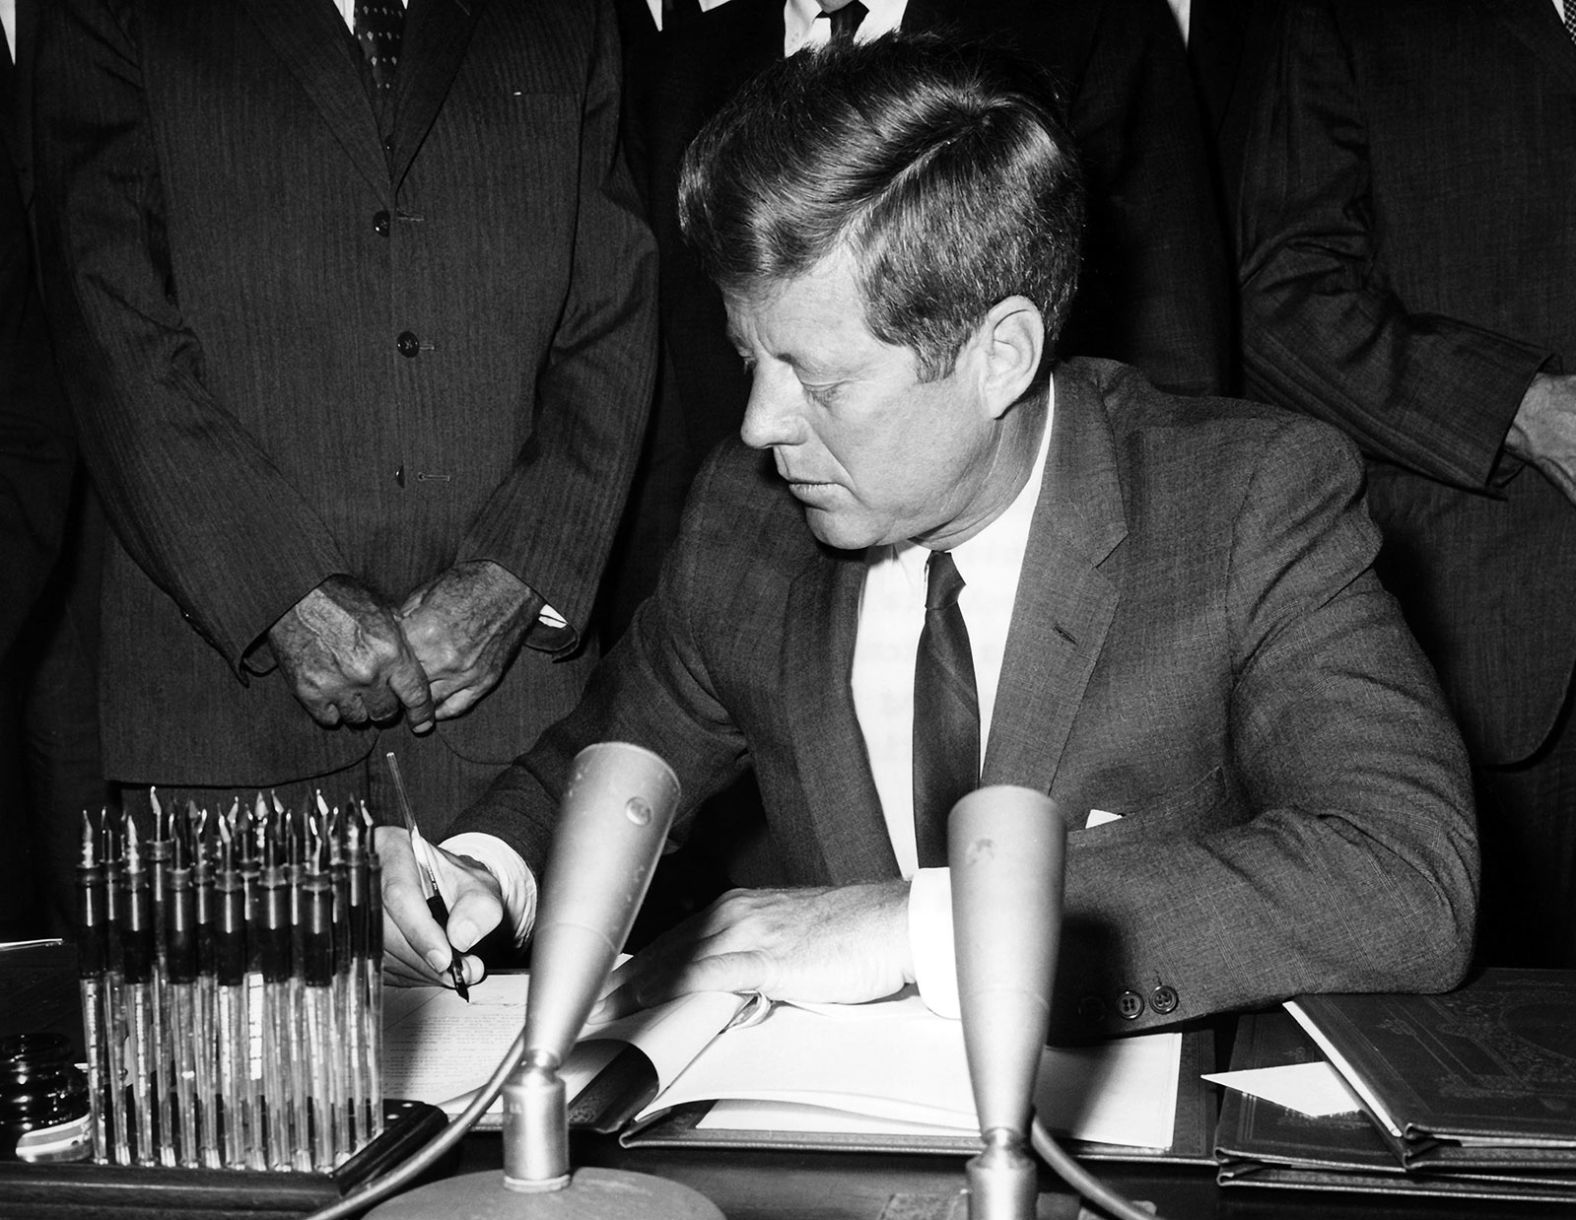 Kennedy signs the Partial Nuclear Test Ban Treaty in October 1963. The treaty, prompted by a public fear of radioactive fallout from nuclear weapons tests, banned the testing of nuclear weapons in the air, space and water. 